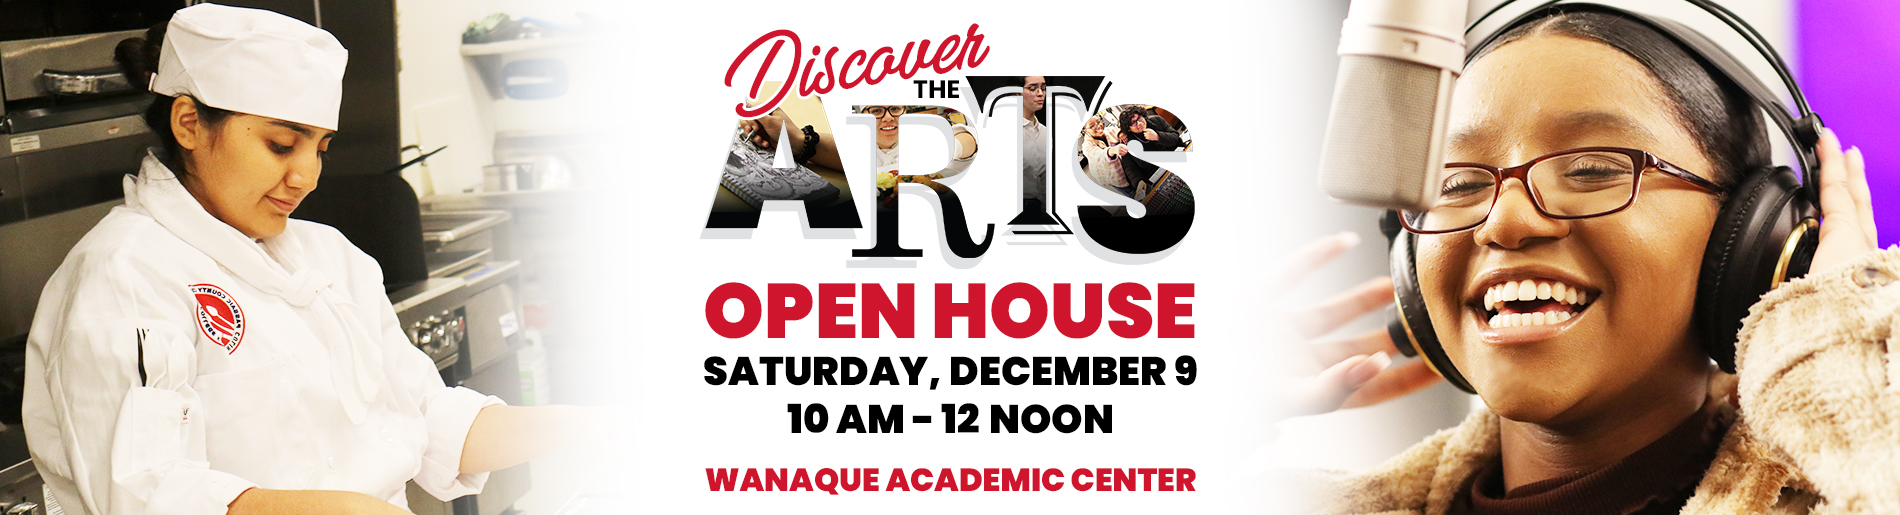 Discover the Arts Open House. Sat, Dec 9 from 10am - noon. Wanaque Academic Center